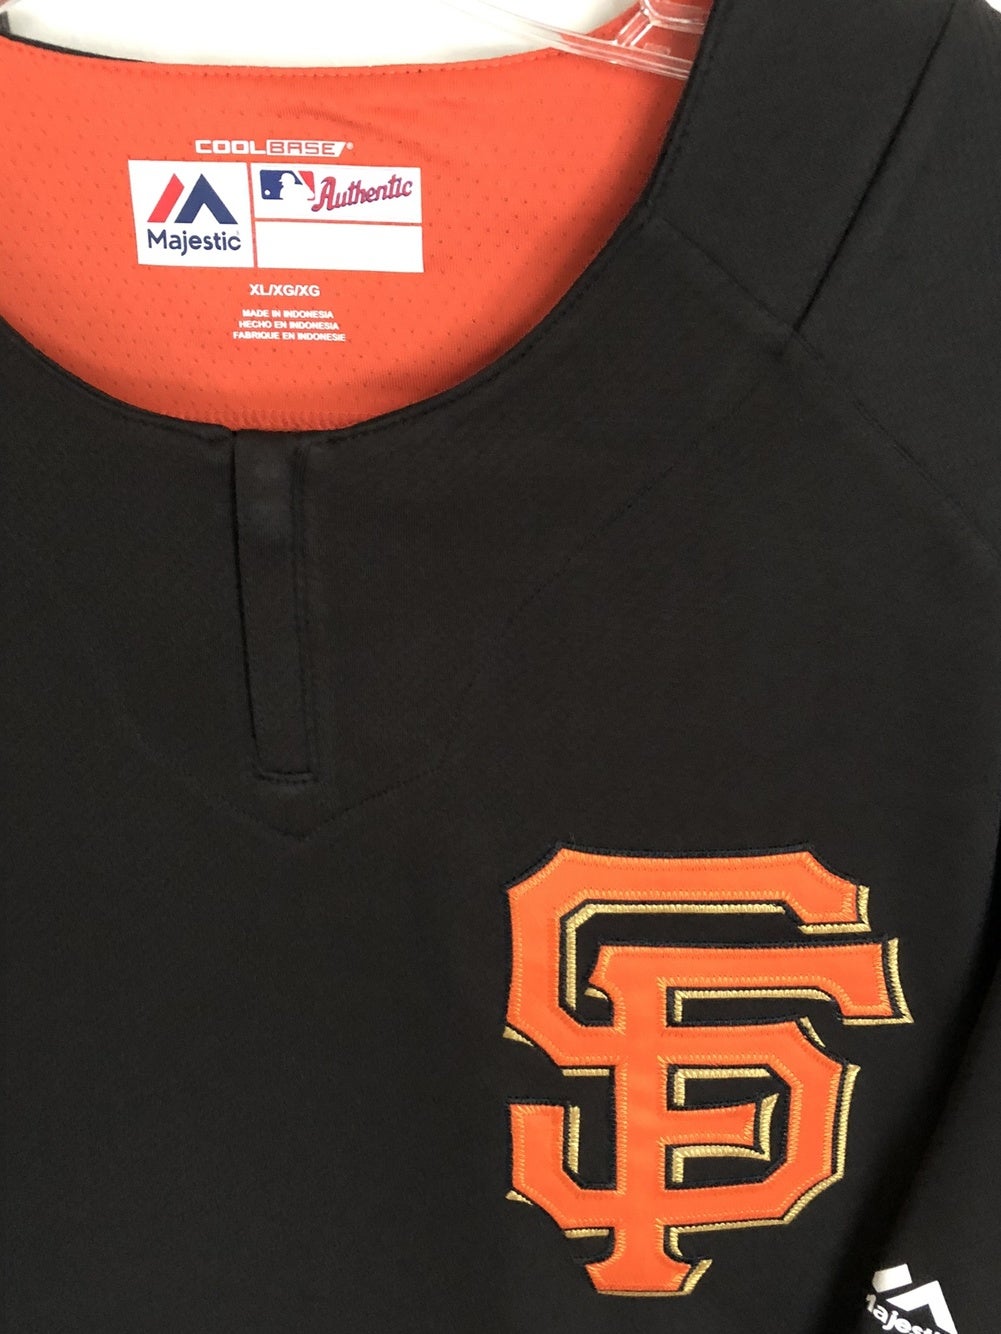 Majestic, Shirts, Sf Giants Authentic Road Jersey 20 World Series